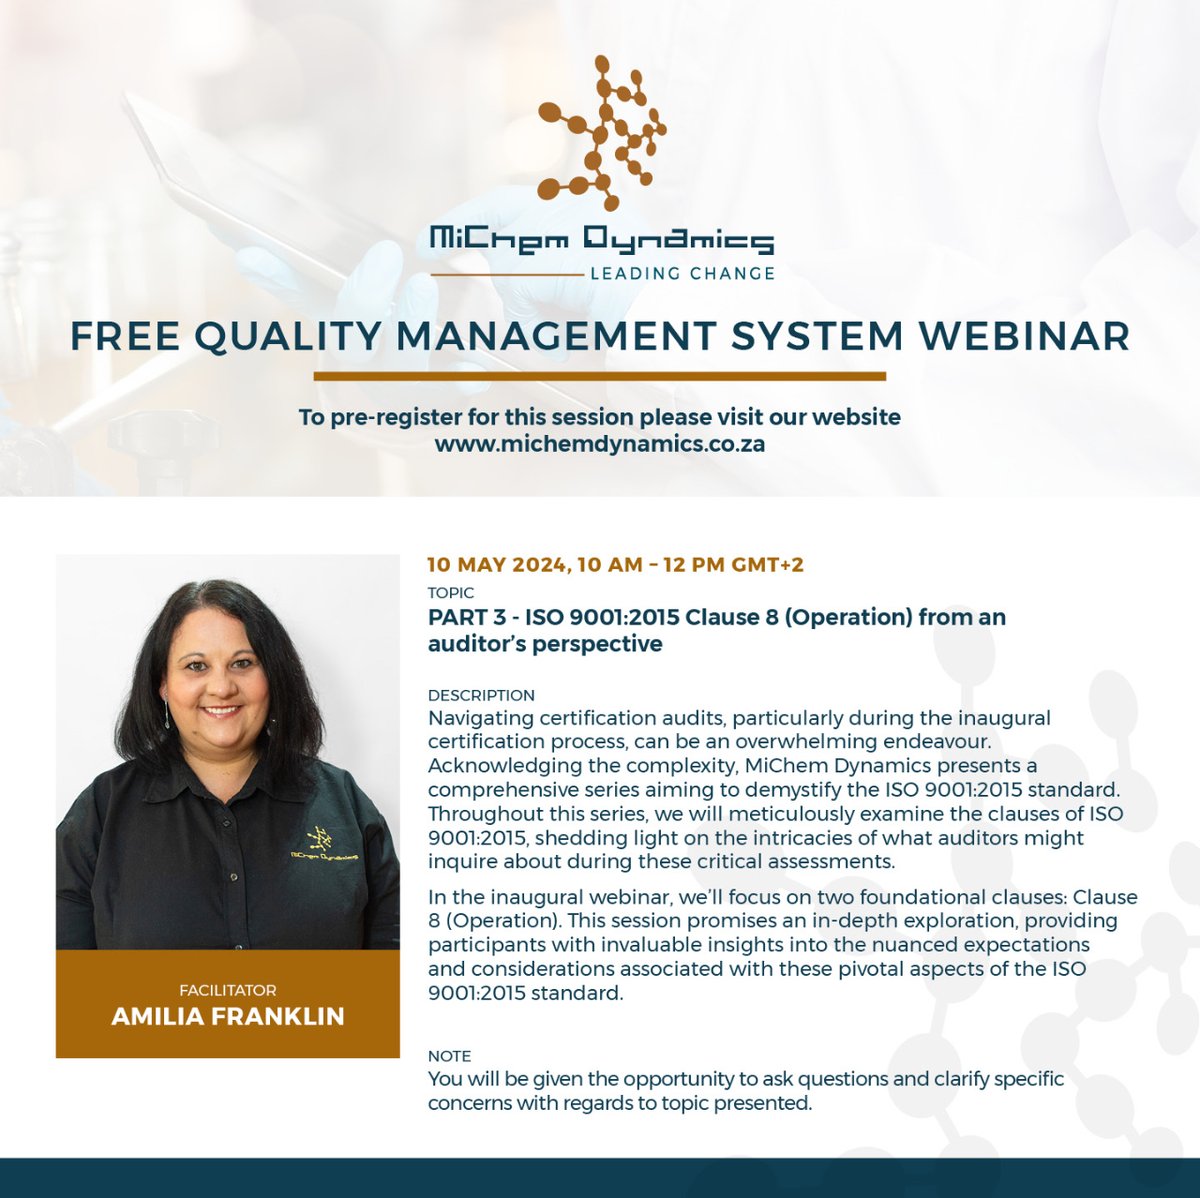 OUR FREE QUALITY (ISO 9001) WEBINAR SERIES FOR 2024 CONTINUES! Don’t miss out! Register here: us02web.zoom.us/webinar/regist…  Visit our website to pre-register for all our upcoming free 2024 quality webinars: michemdynamics.com/quality-servic…   #changinglives  #qualitymanagementsystem #ISO9001